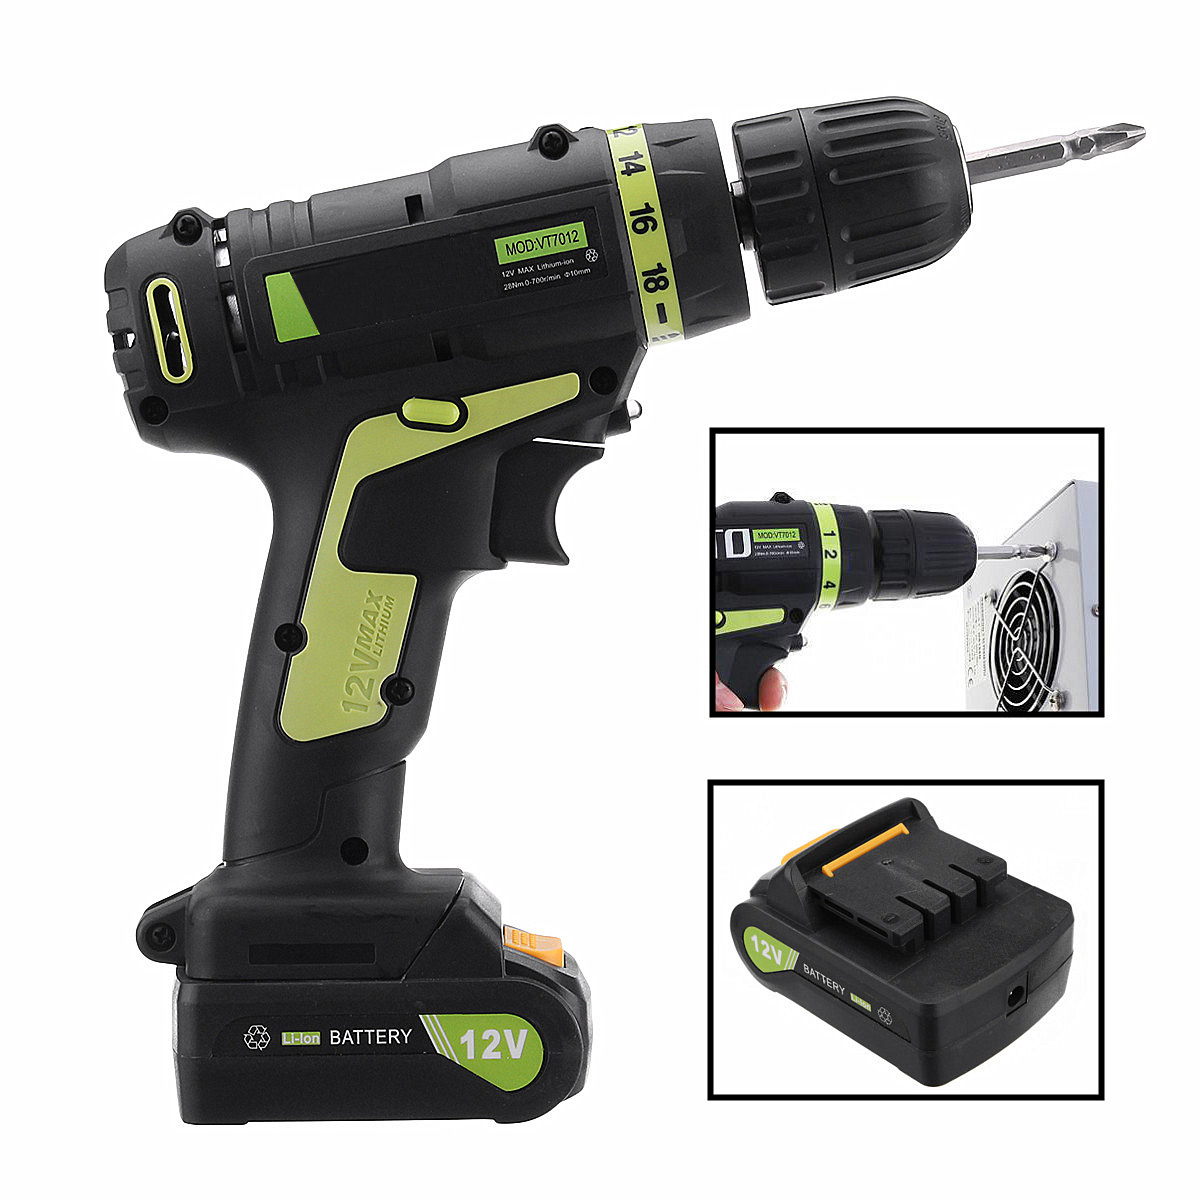 VOTO-AC100-240V-DC12V-Cordless-Rechargeable--Electric-Screwdriver-Li-ion-Battery-Power-Scew-Driver-1305287-9